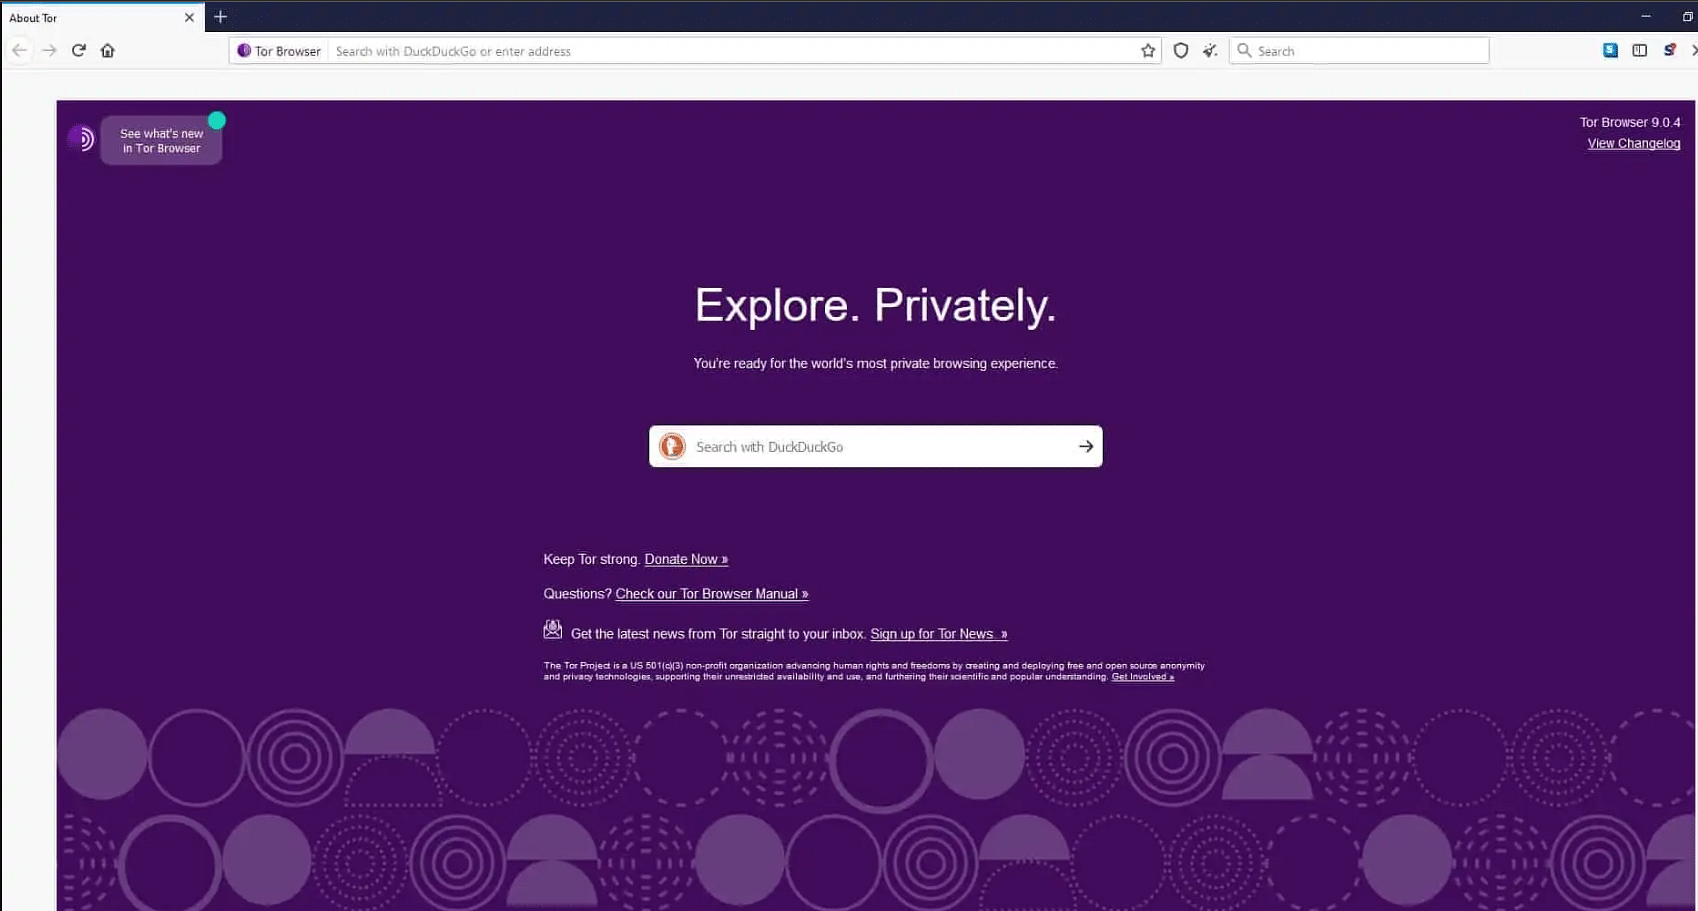 About Tor 
Tor Browser 
See what's new 
in Tor Browær 
Search With DuckDuckGc or enter *ddress 
Explore. Privately. 
Youre r&fy for the world's most priv*e browsing exlkrience_ 
O) Search rath DuckDuckGo 
Keep for strong. Donate Now 
Questions? Check our Tor Browser Manual » 
Get the latest news from Tor straight to your inbox. 
th.it "'d 
Tor Browser 9.0.4 